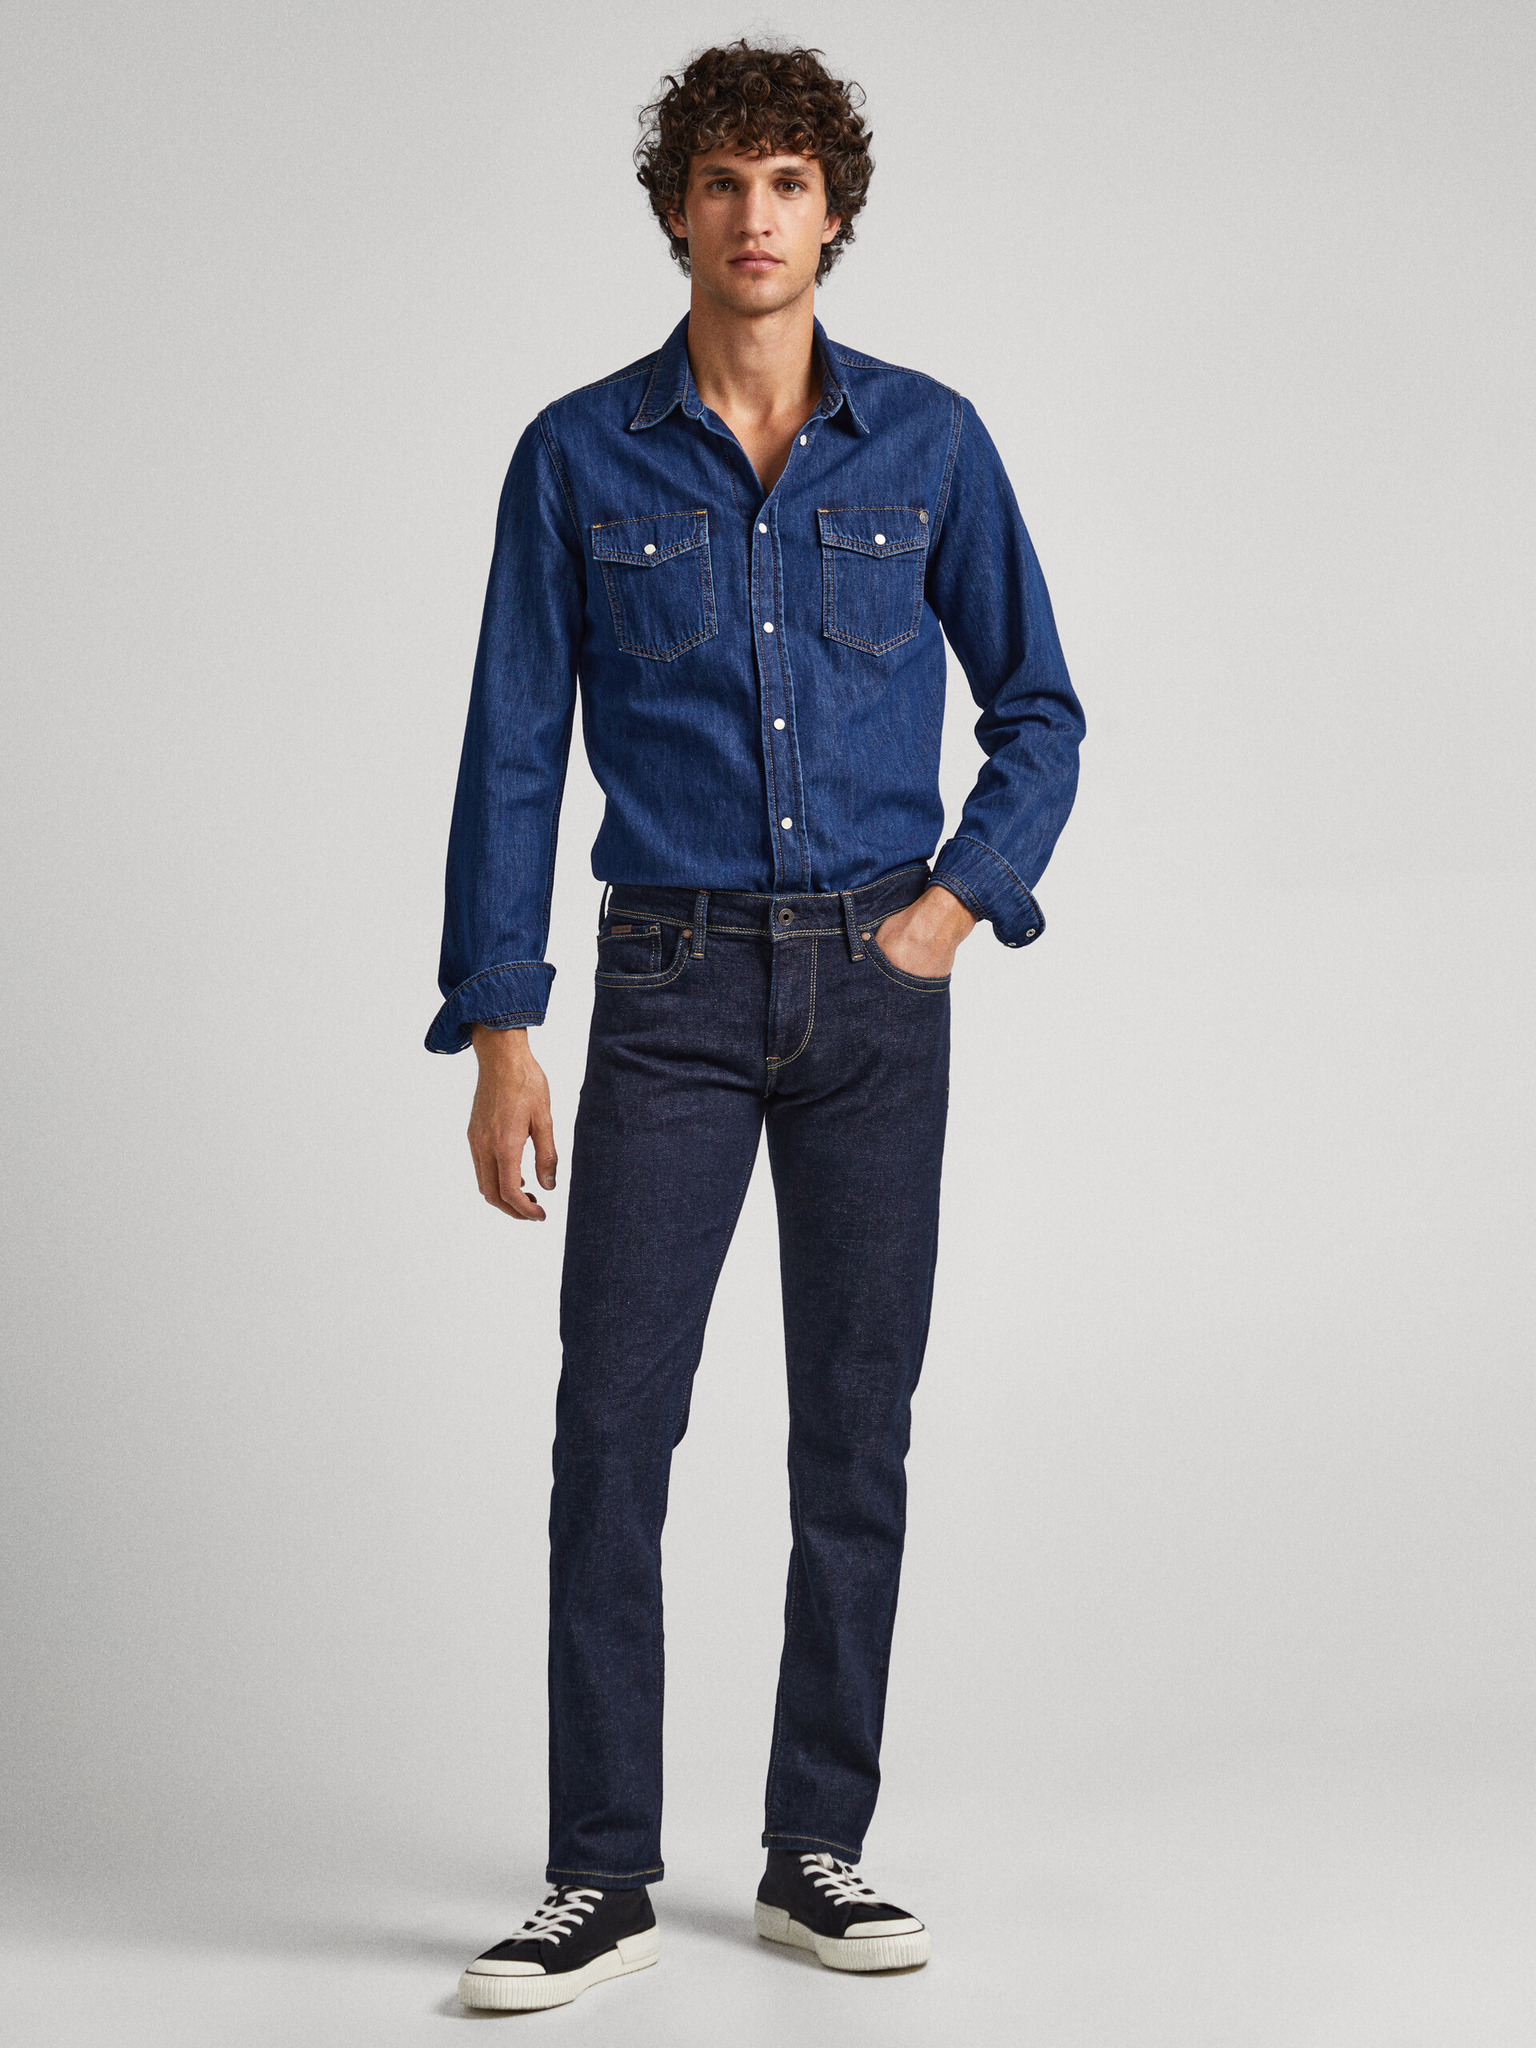 - Hatch Jeans Pepe Jeans